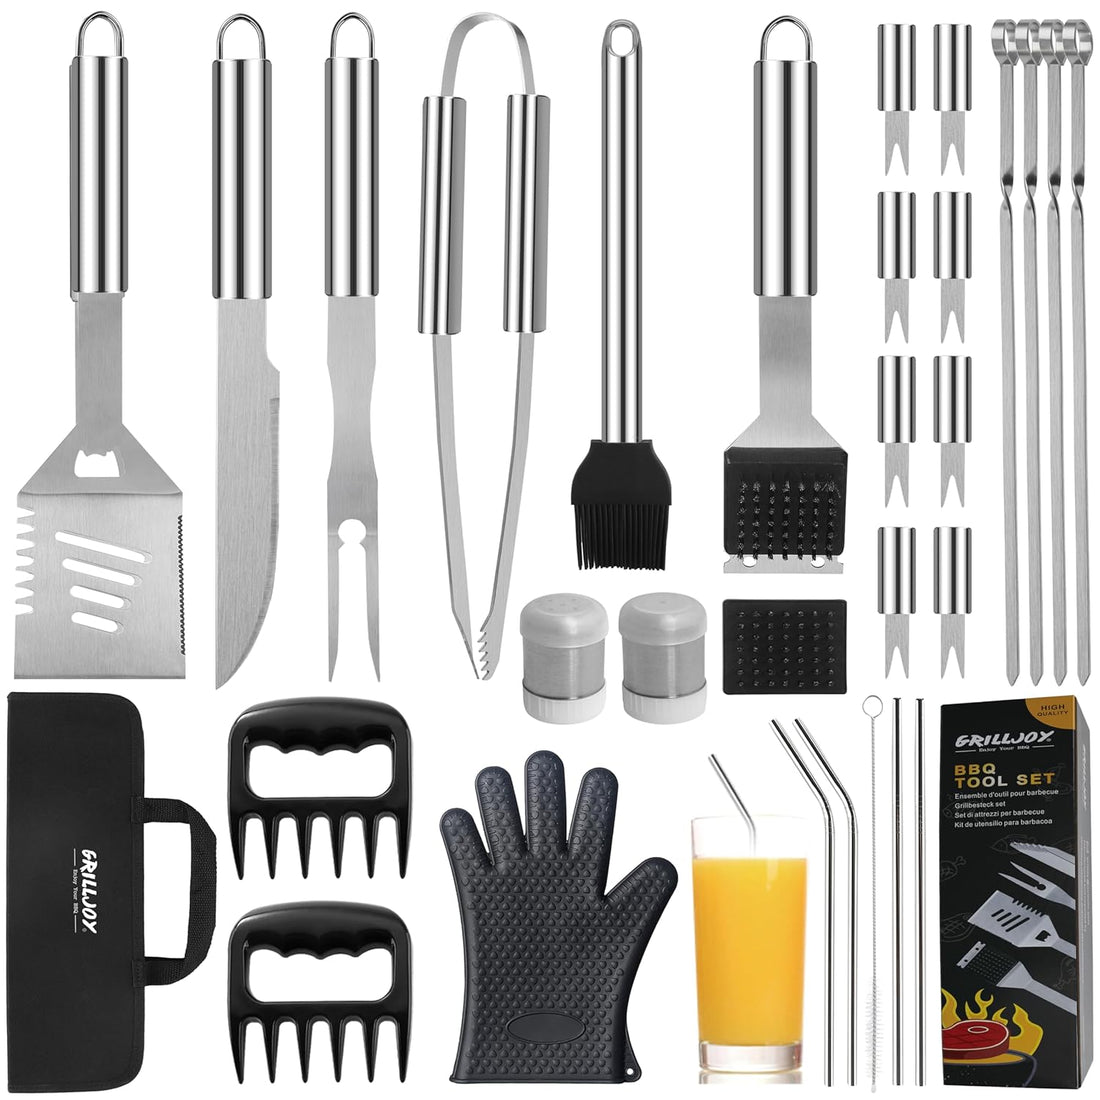 grilljoy 30PCS BBQ Grill Tools Set with Meat Claws - Extra Thick Steel Spatula, Fork& Tongs - Complete Grilling Accessories in Portable Bag - Perfect Grill Gifts for Men and Women